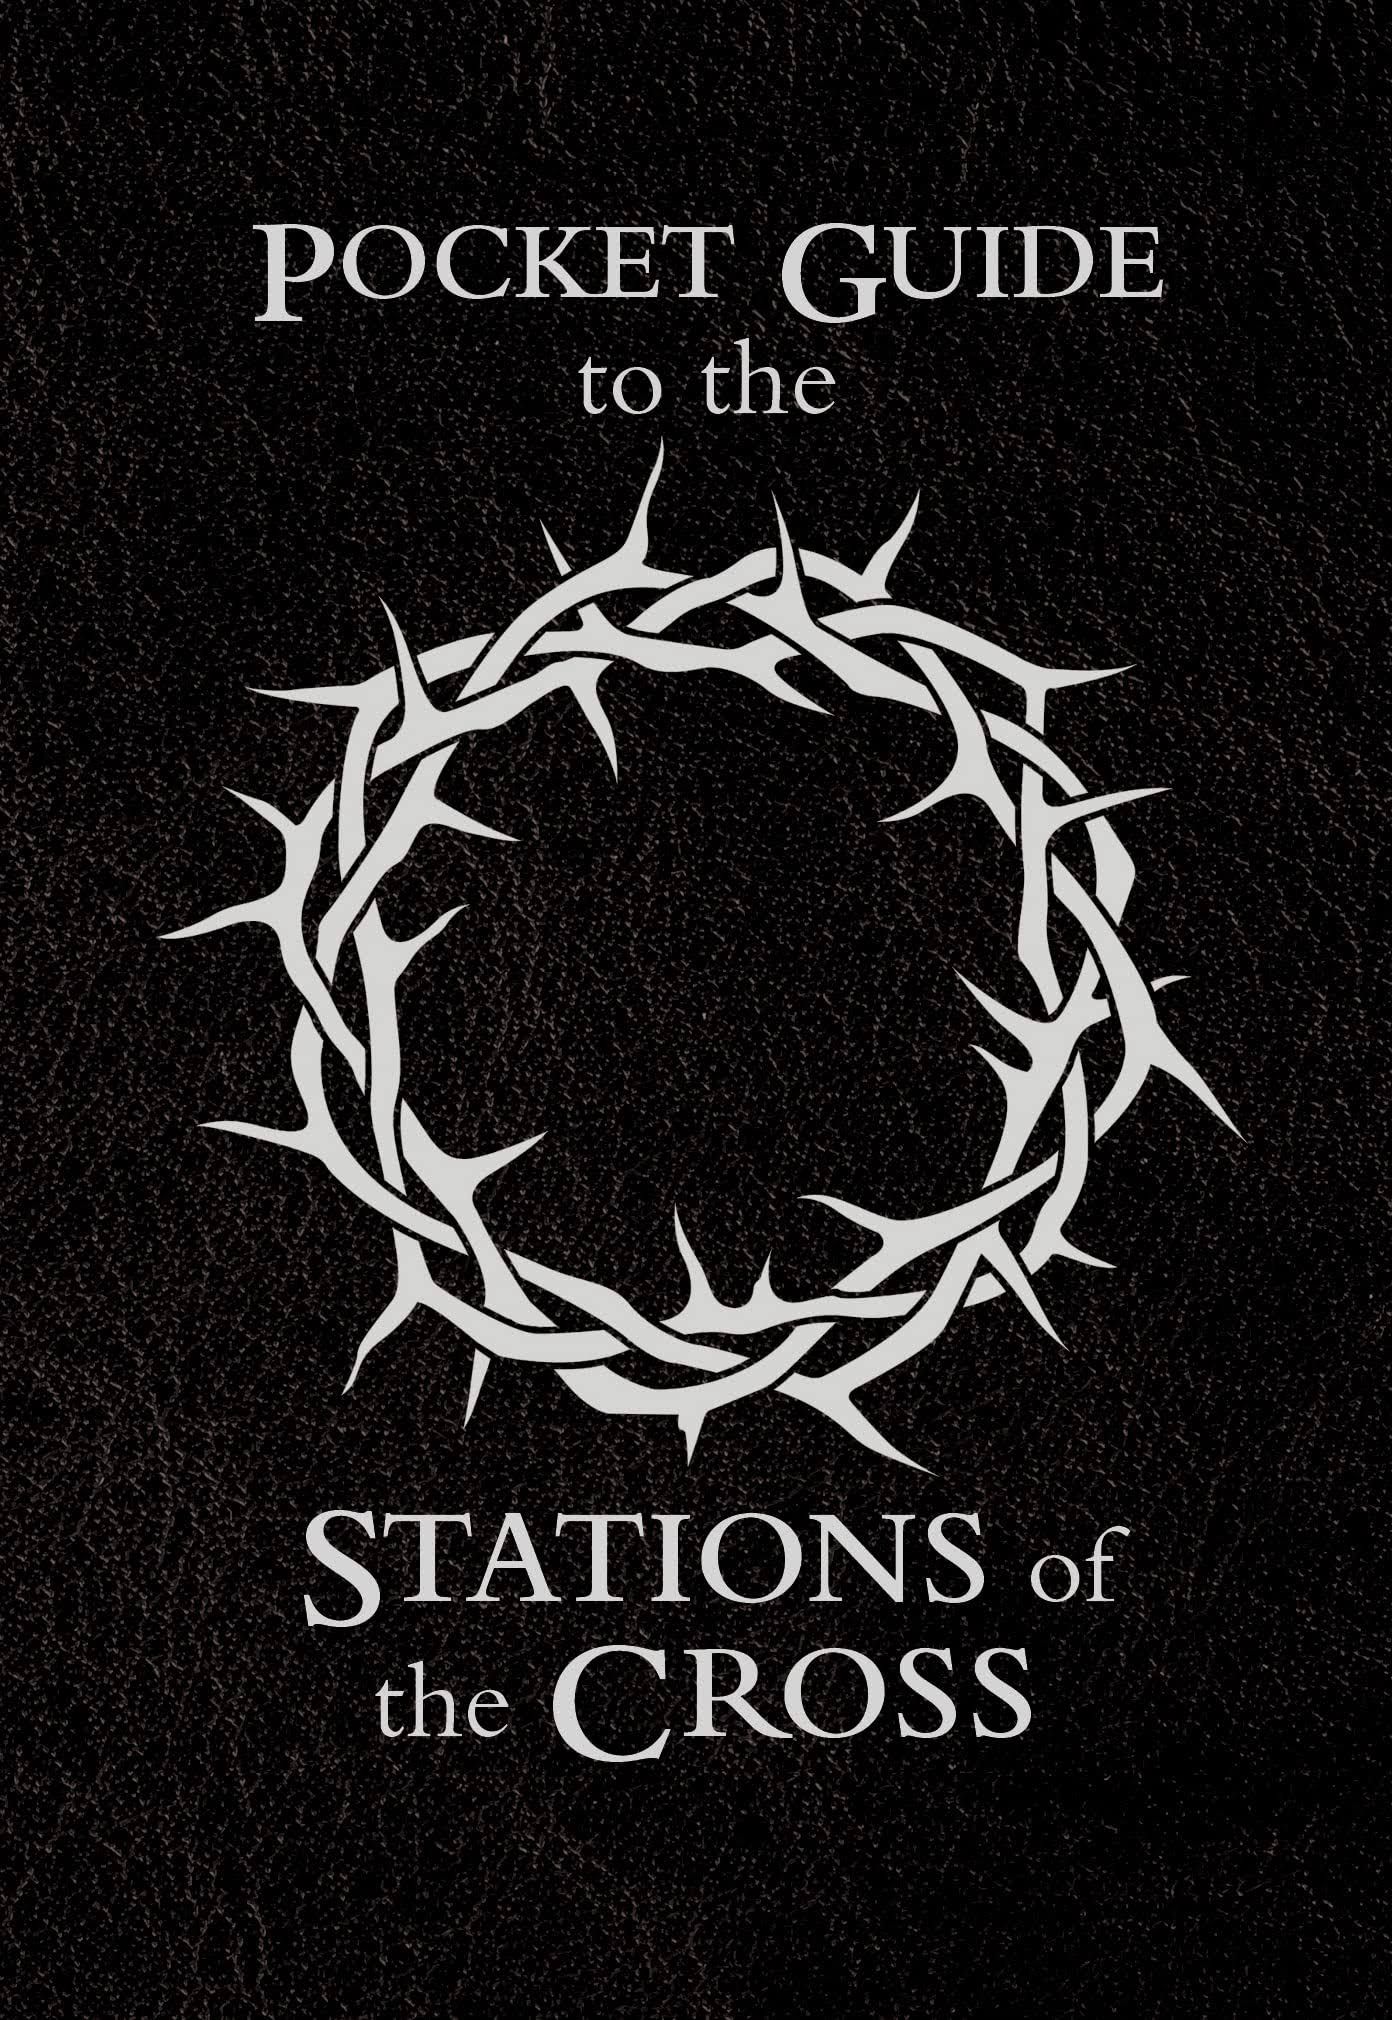 Pocket Guide to Stations of The Cross by Edward Sri